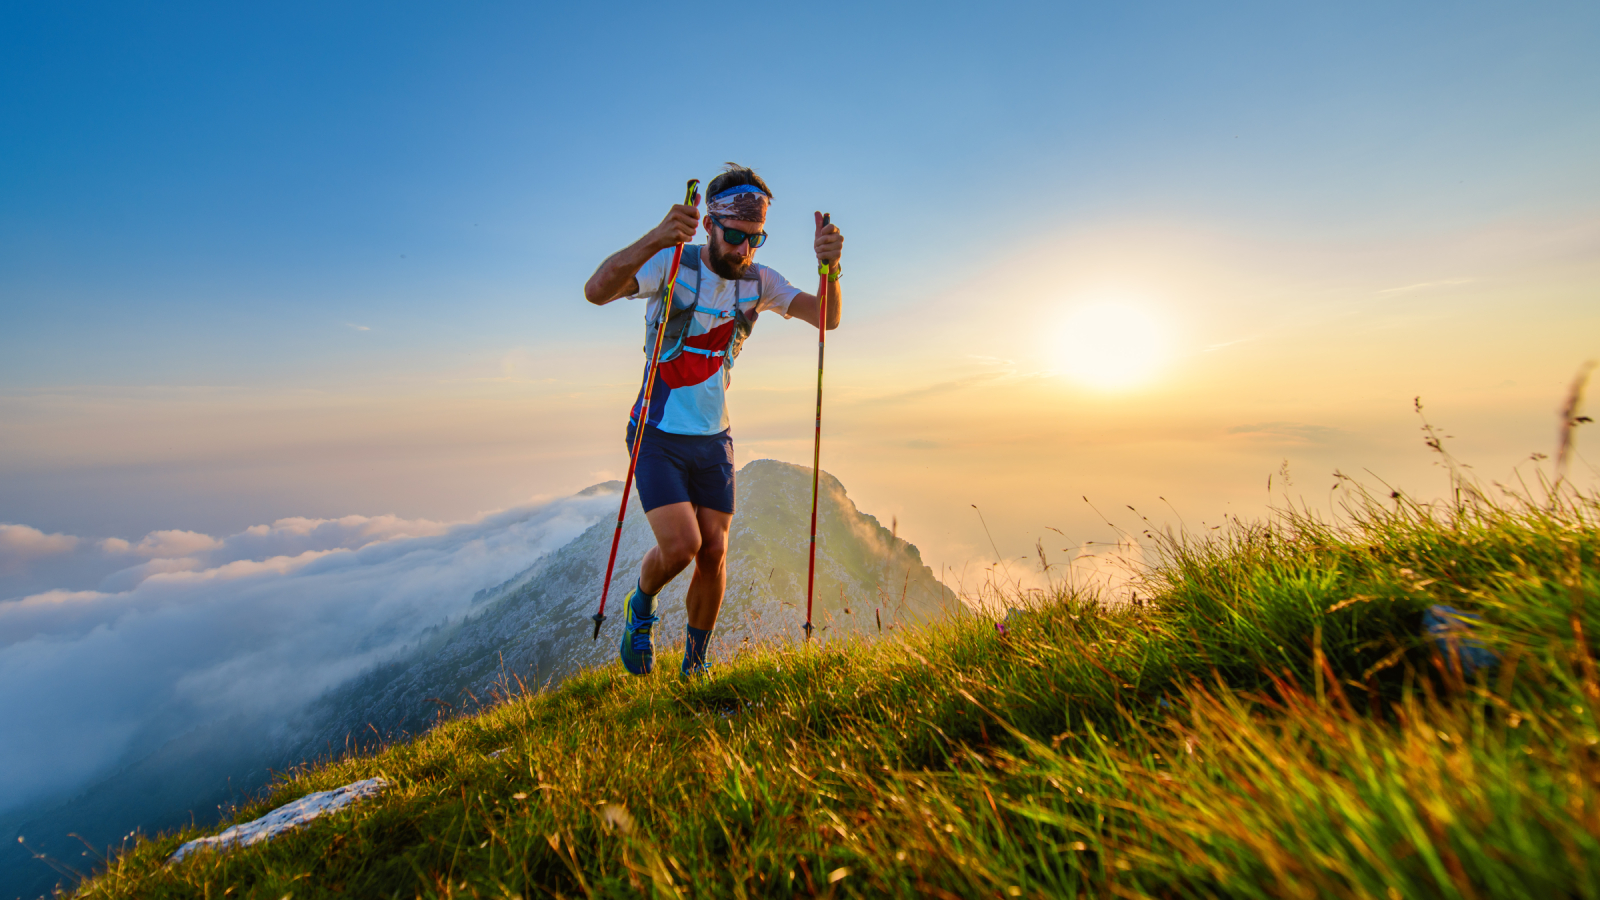 An ultra-runner summits a mountain peak with the sun low in the sky behind him